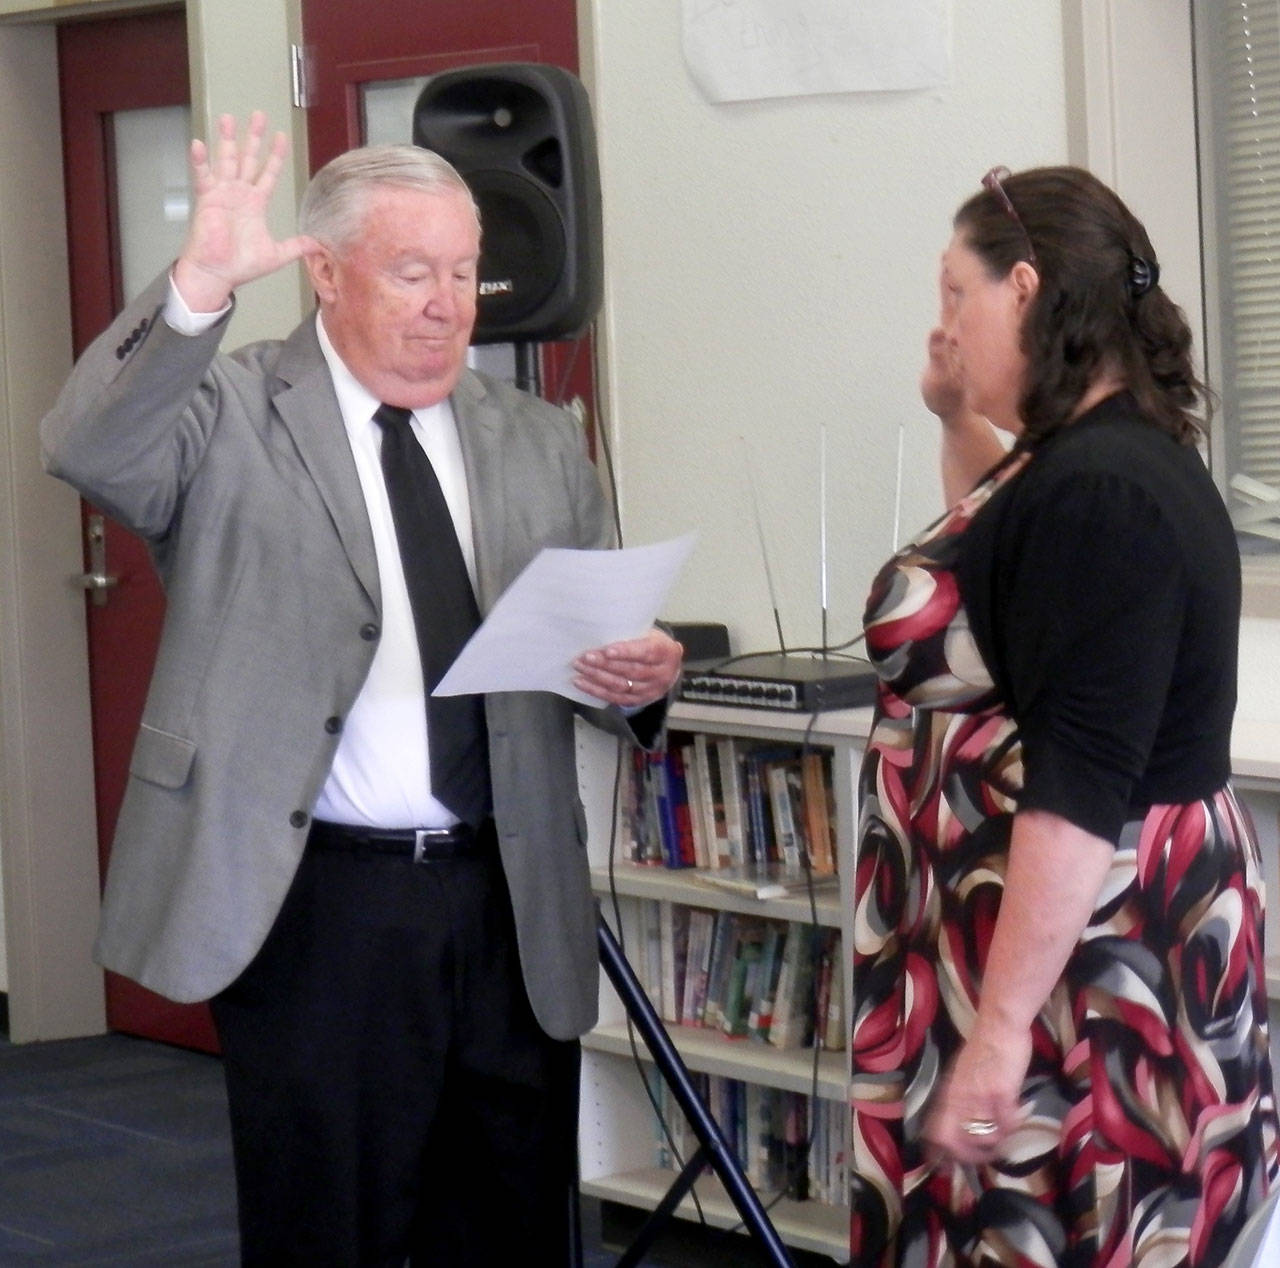 North Coast News Interim North Beach Co-superintendent Stan Pinnick administers the oath of office to new Board member Jane Harnagy.